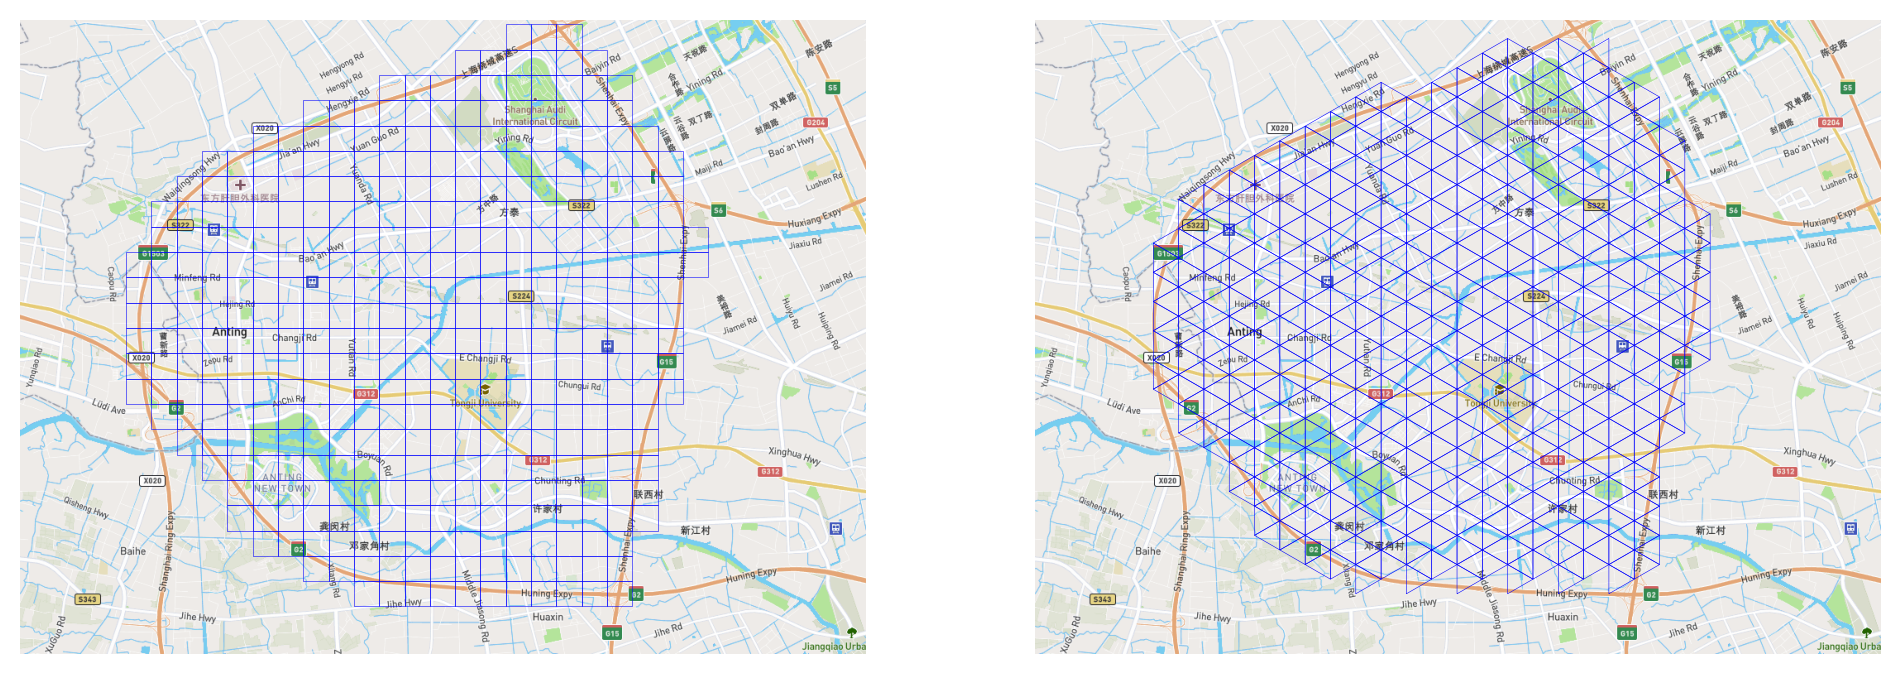 ../_images/gallery_Example_2-Grid-base_processing_framework_of_TransBigData_7_0.png